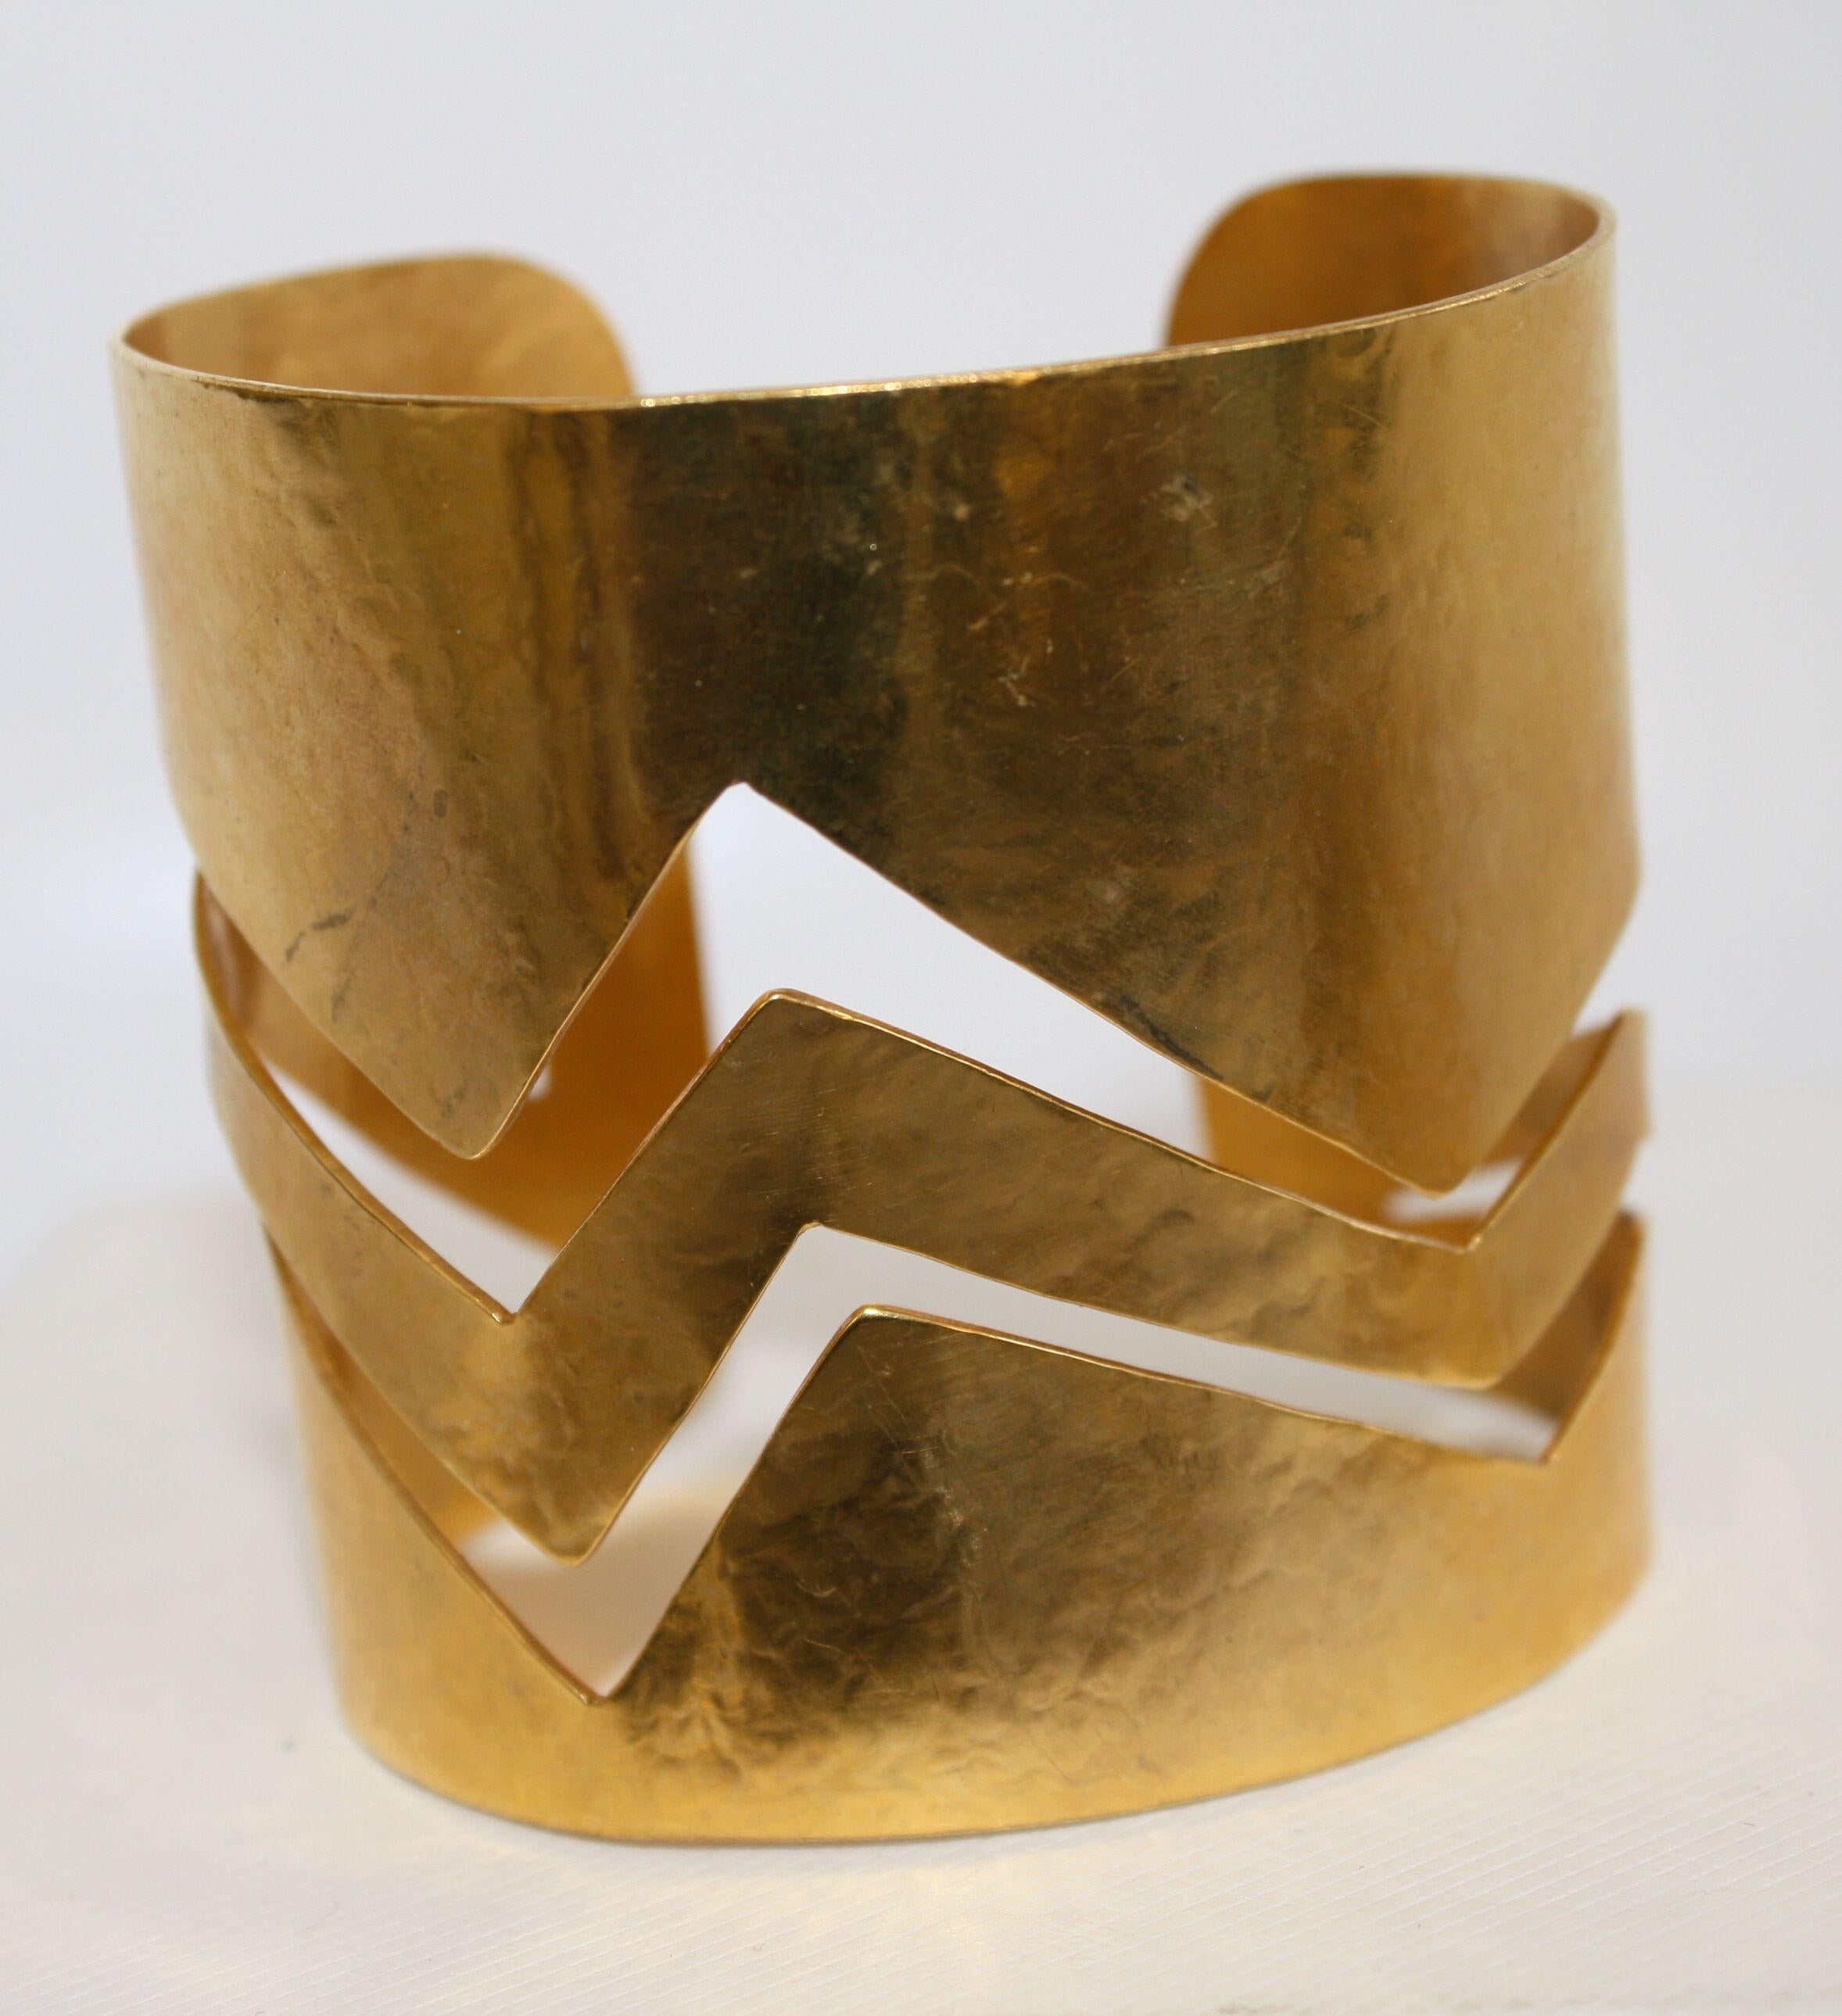 Gilded bronze malleable cuff in zig-zag pattern from Herve van der Straeten. This designer is no longer designing jewelry, making all remaining pieces collectors items!